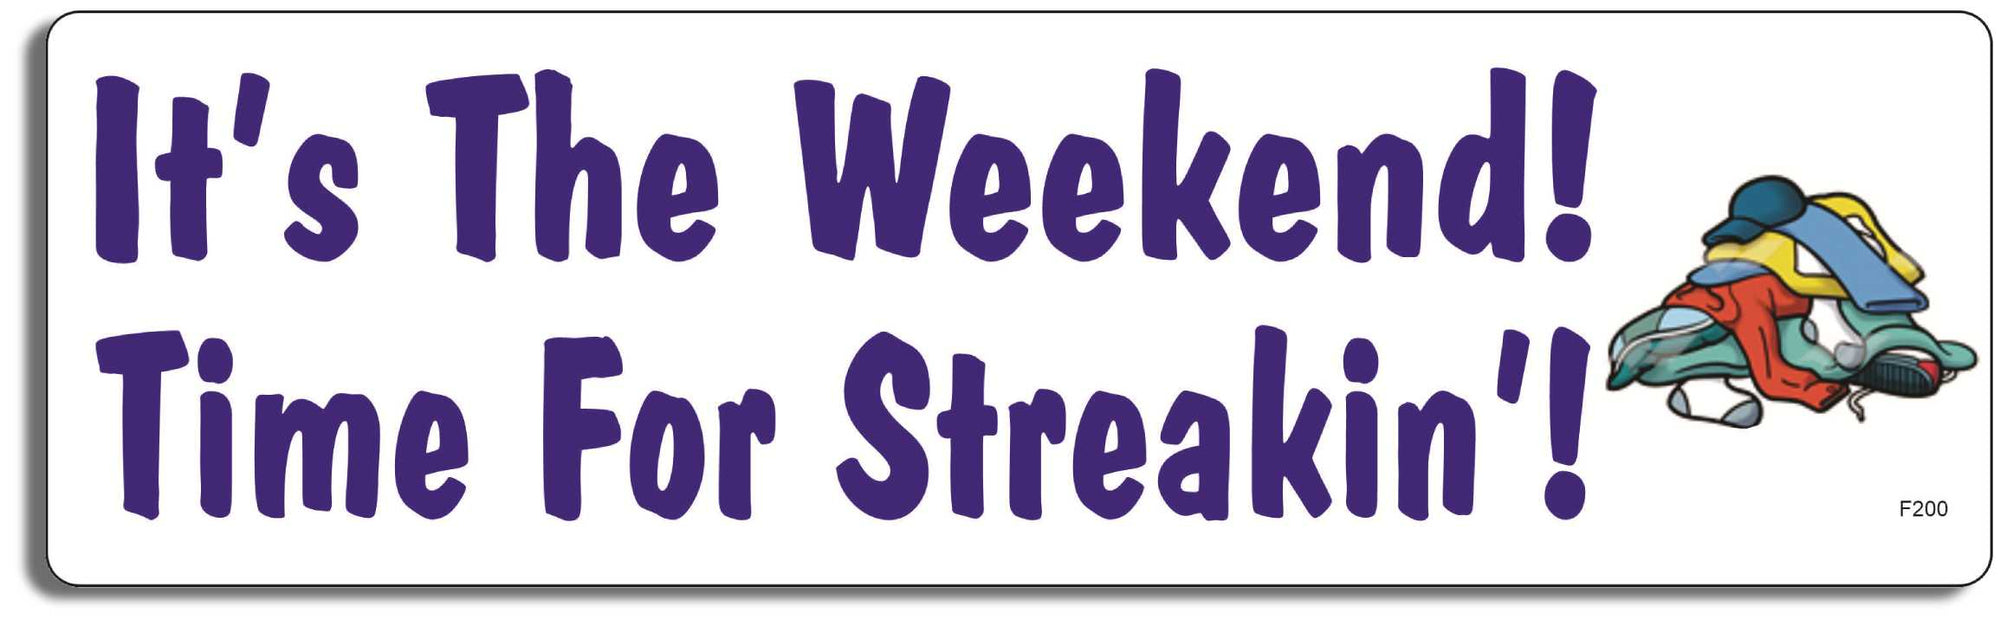 It's The Weekend! Time For Streakin'!  -  3" x 10" -  Decal Bumper Sticker-funny Bumper Sticker Car Magnet It's The Weekend! Time For Streakin'!-  Decal for cars funny, funny quote